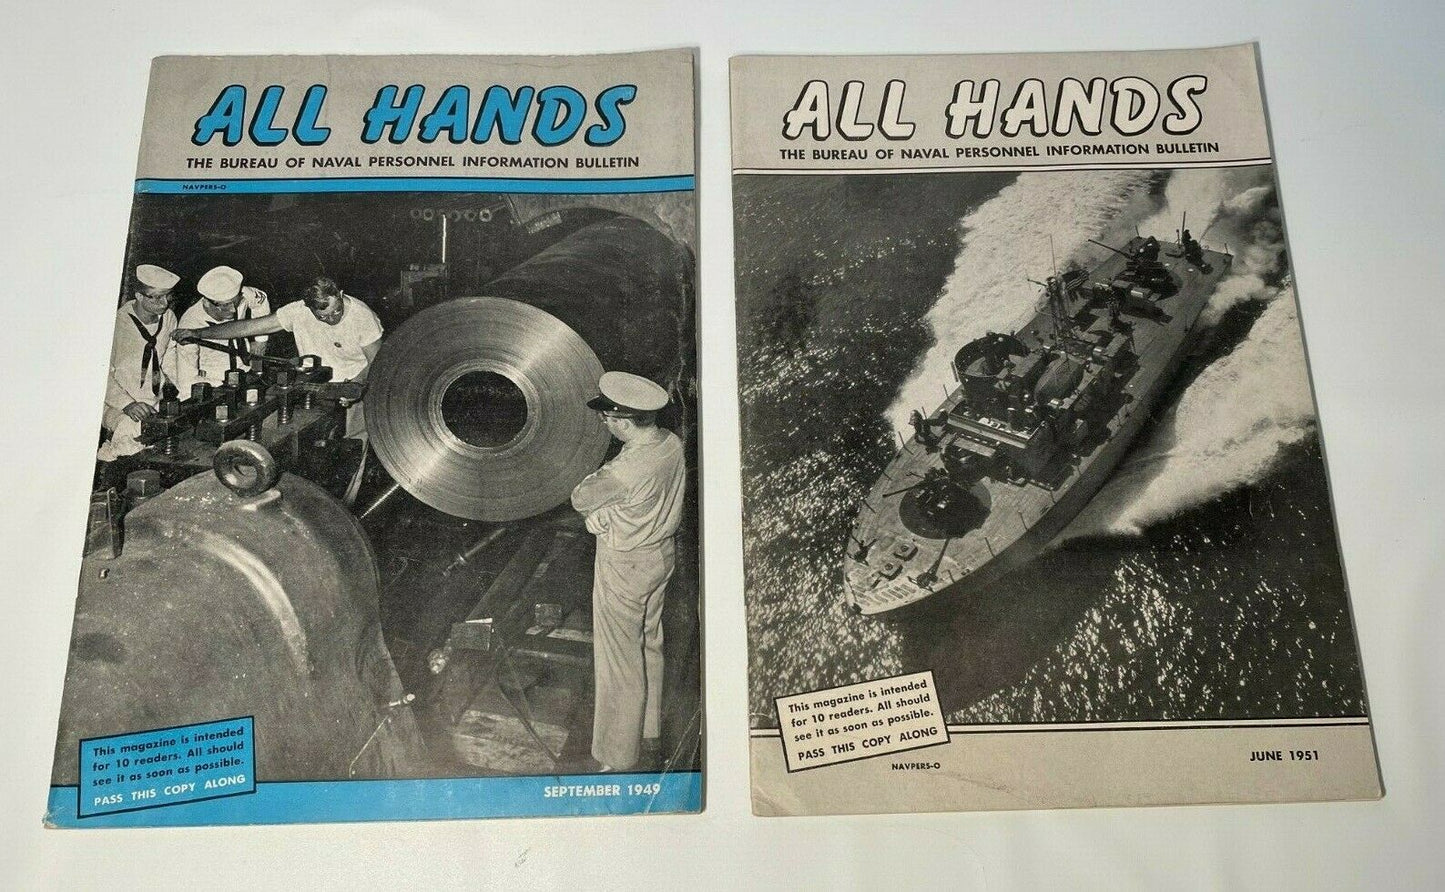 ALL HANDS, The Bureau of Naval Personnel Information Bulletin, 1949 & 1951